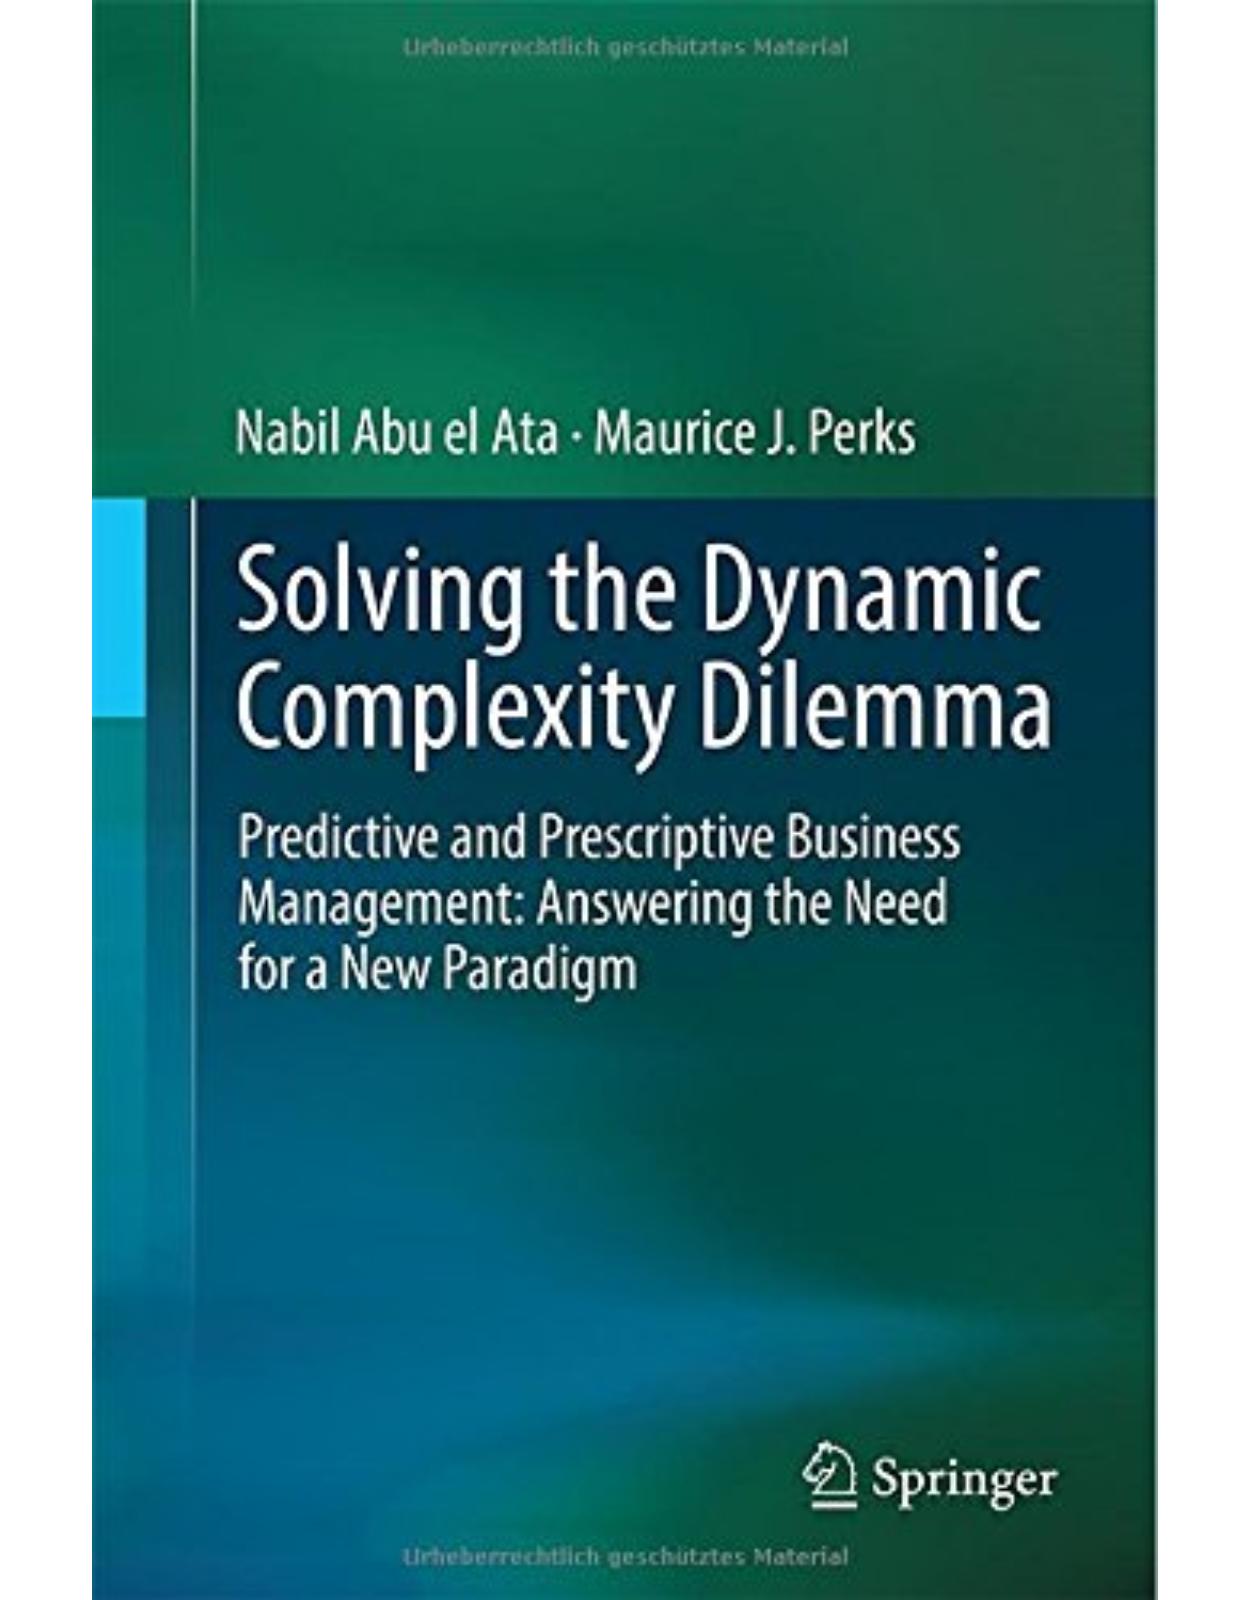 Solving the Dynamic Complexity Dilemma